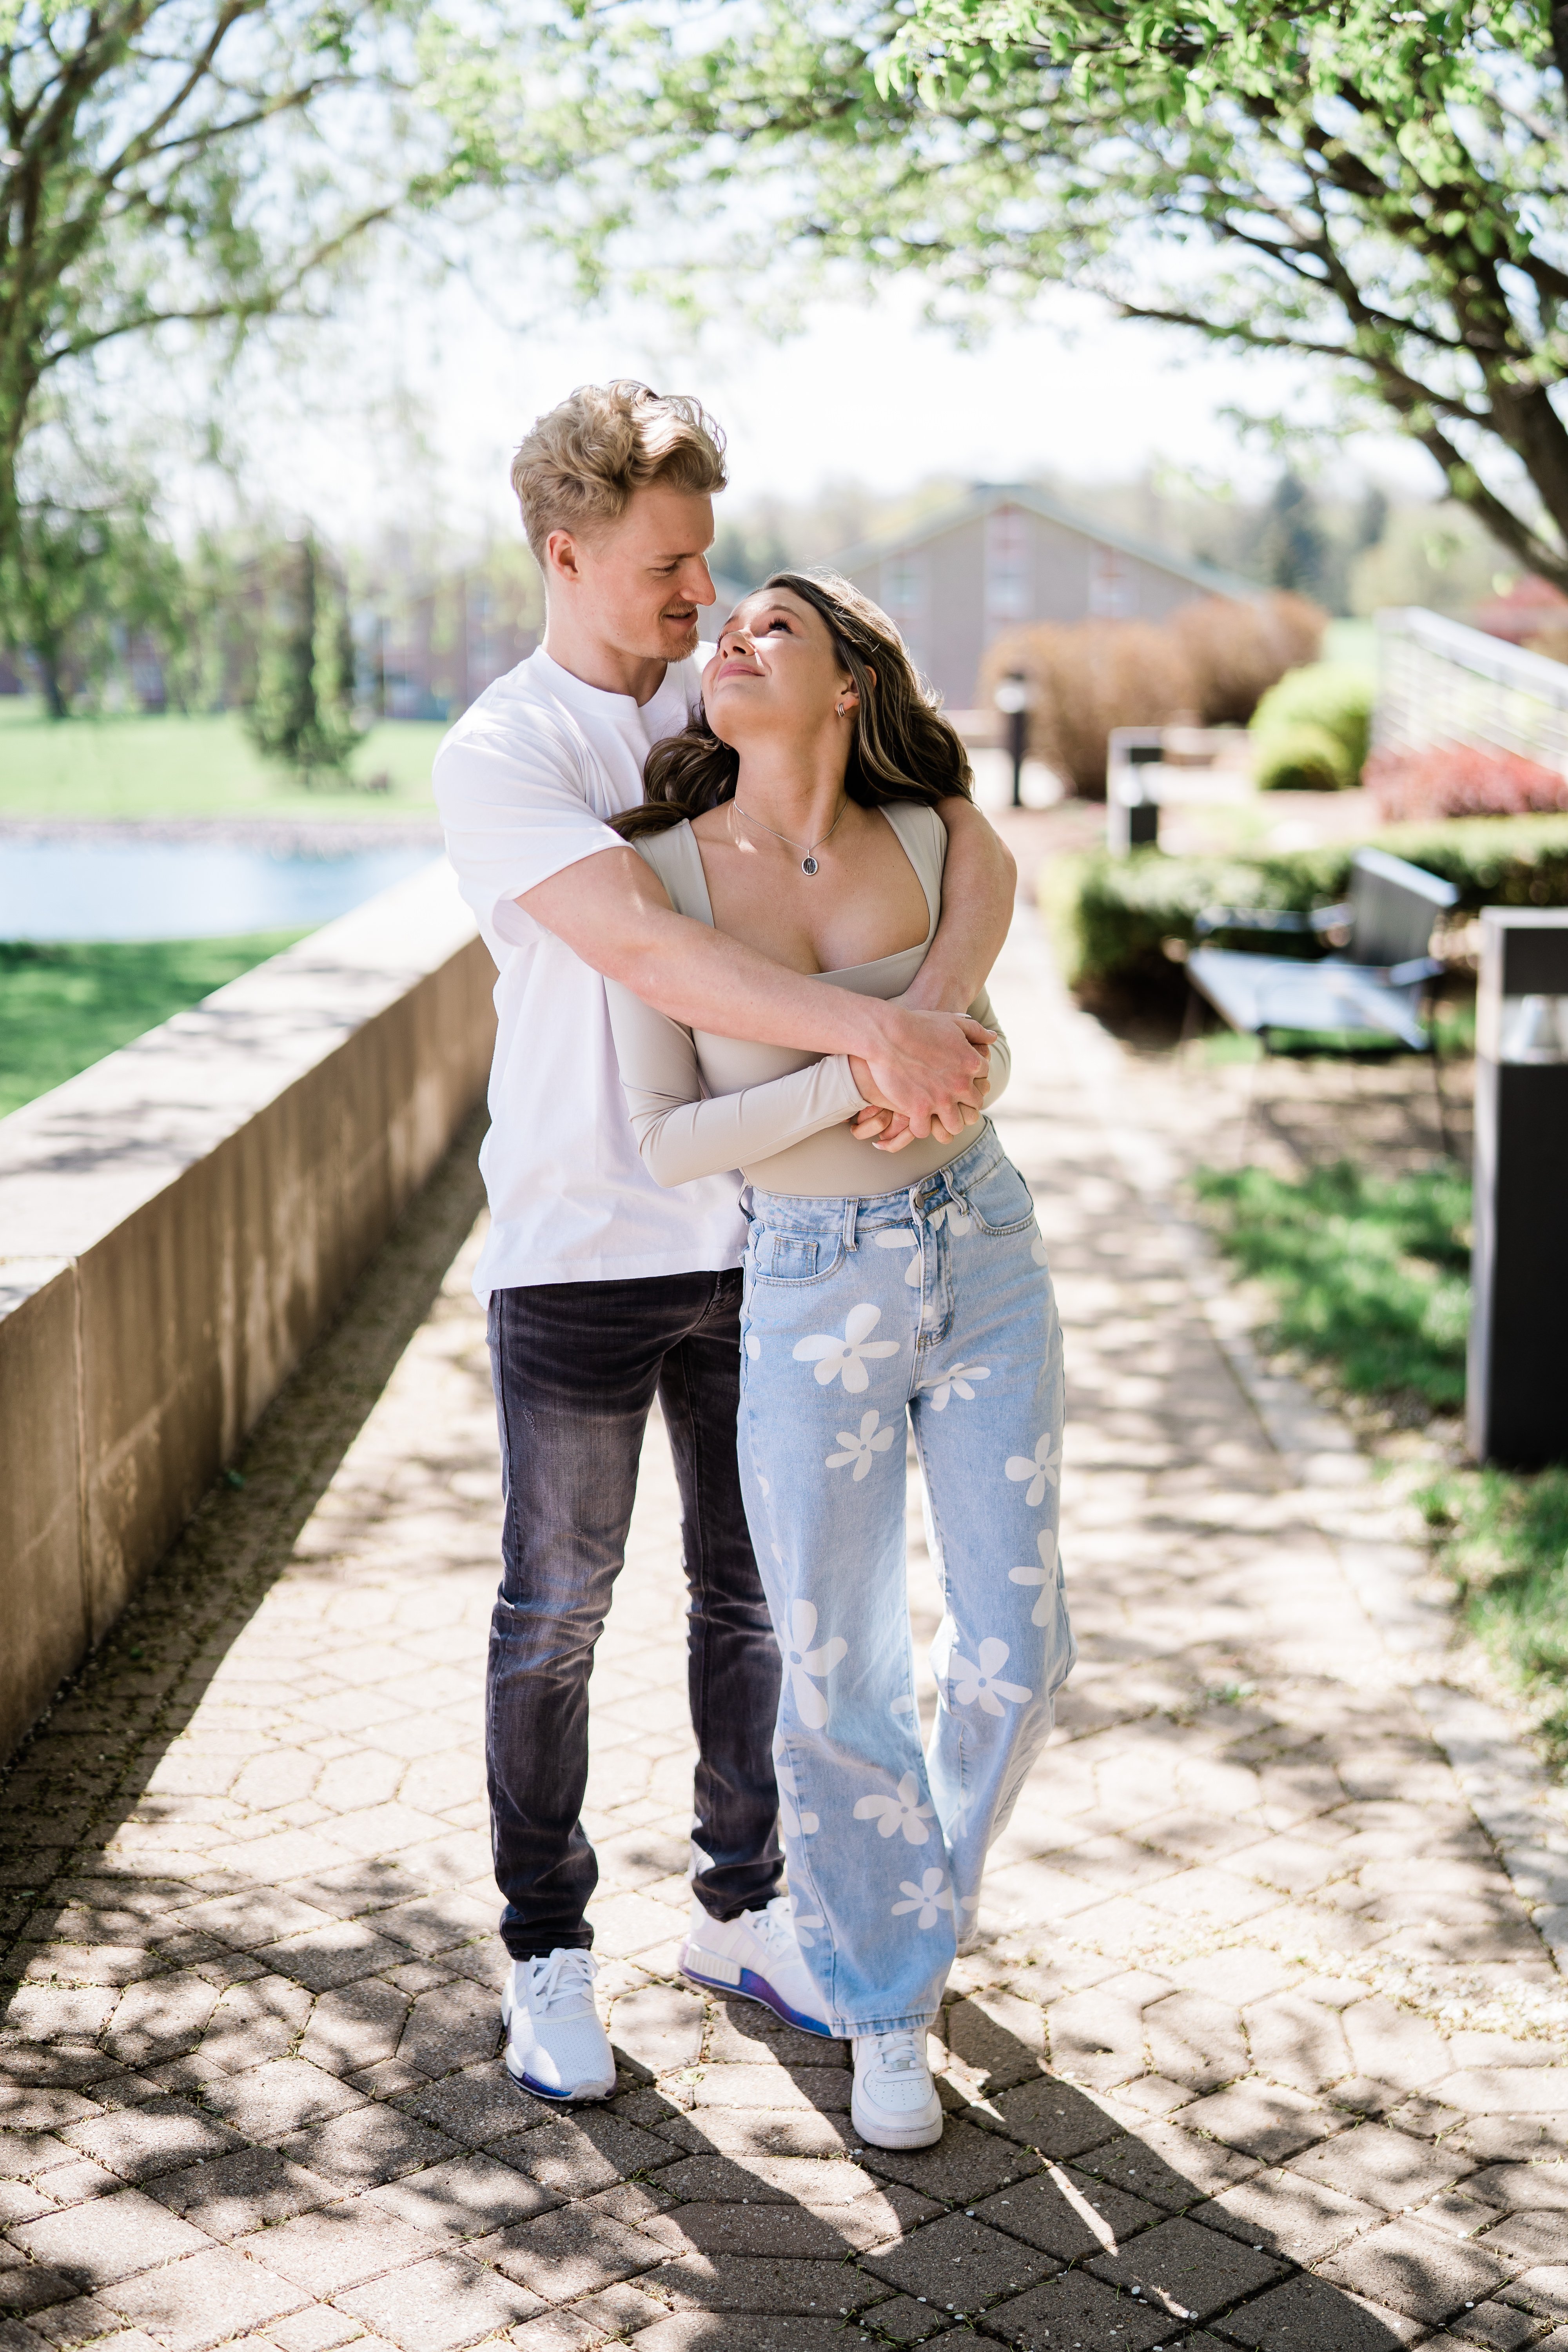 spring engagement pictures with man standing behind woman while embracing her as she looks up at him and laughs